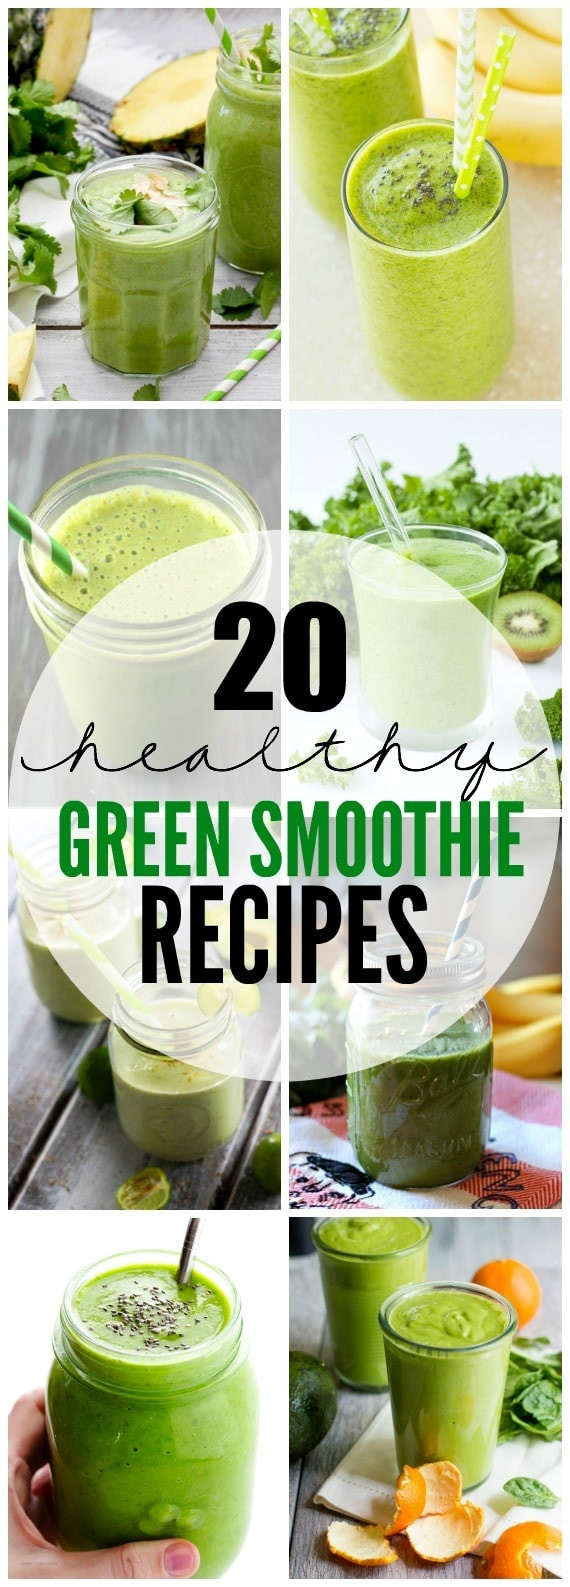 Healthy Energy Smoothie Recipes Best 20 20 Healthy Green Smoothie Recipes Yummy Healthy Easy